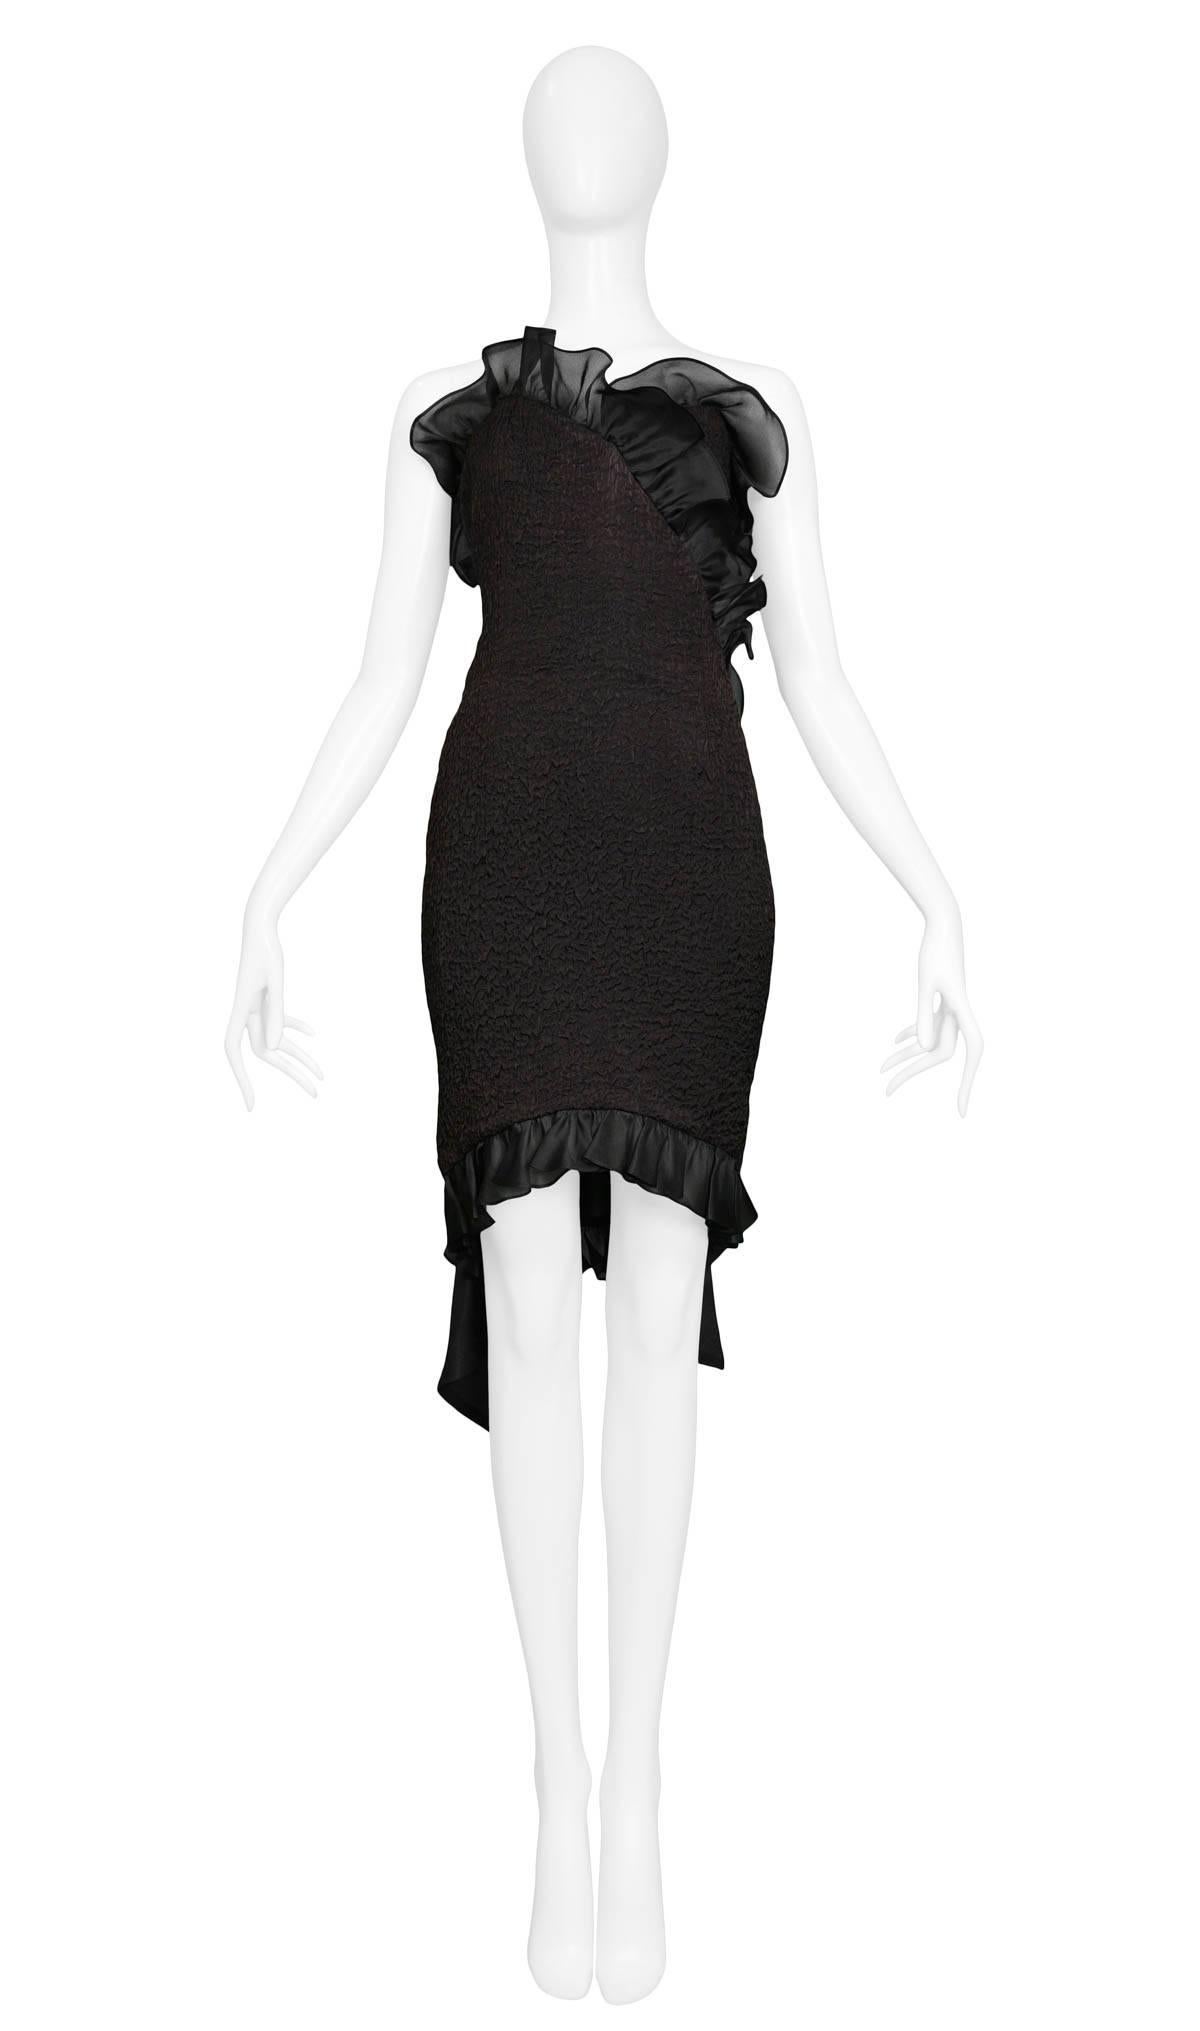 Vintage black textured silk strapless cocktail dress with ruffles along the sweetheart neckline & hemline. The dress features large silk bow detail at back. From the1987 Spring/Summer Collection. 

Excellent Condition.

Size: 38